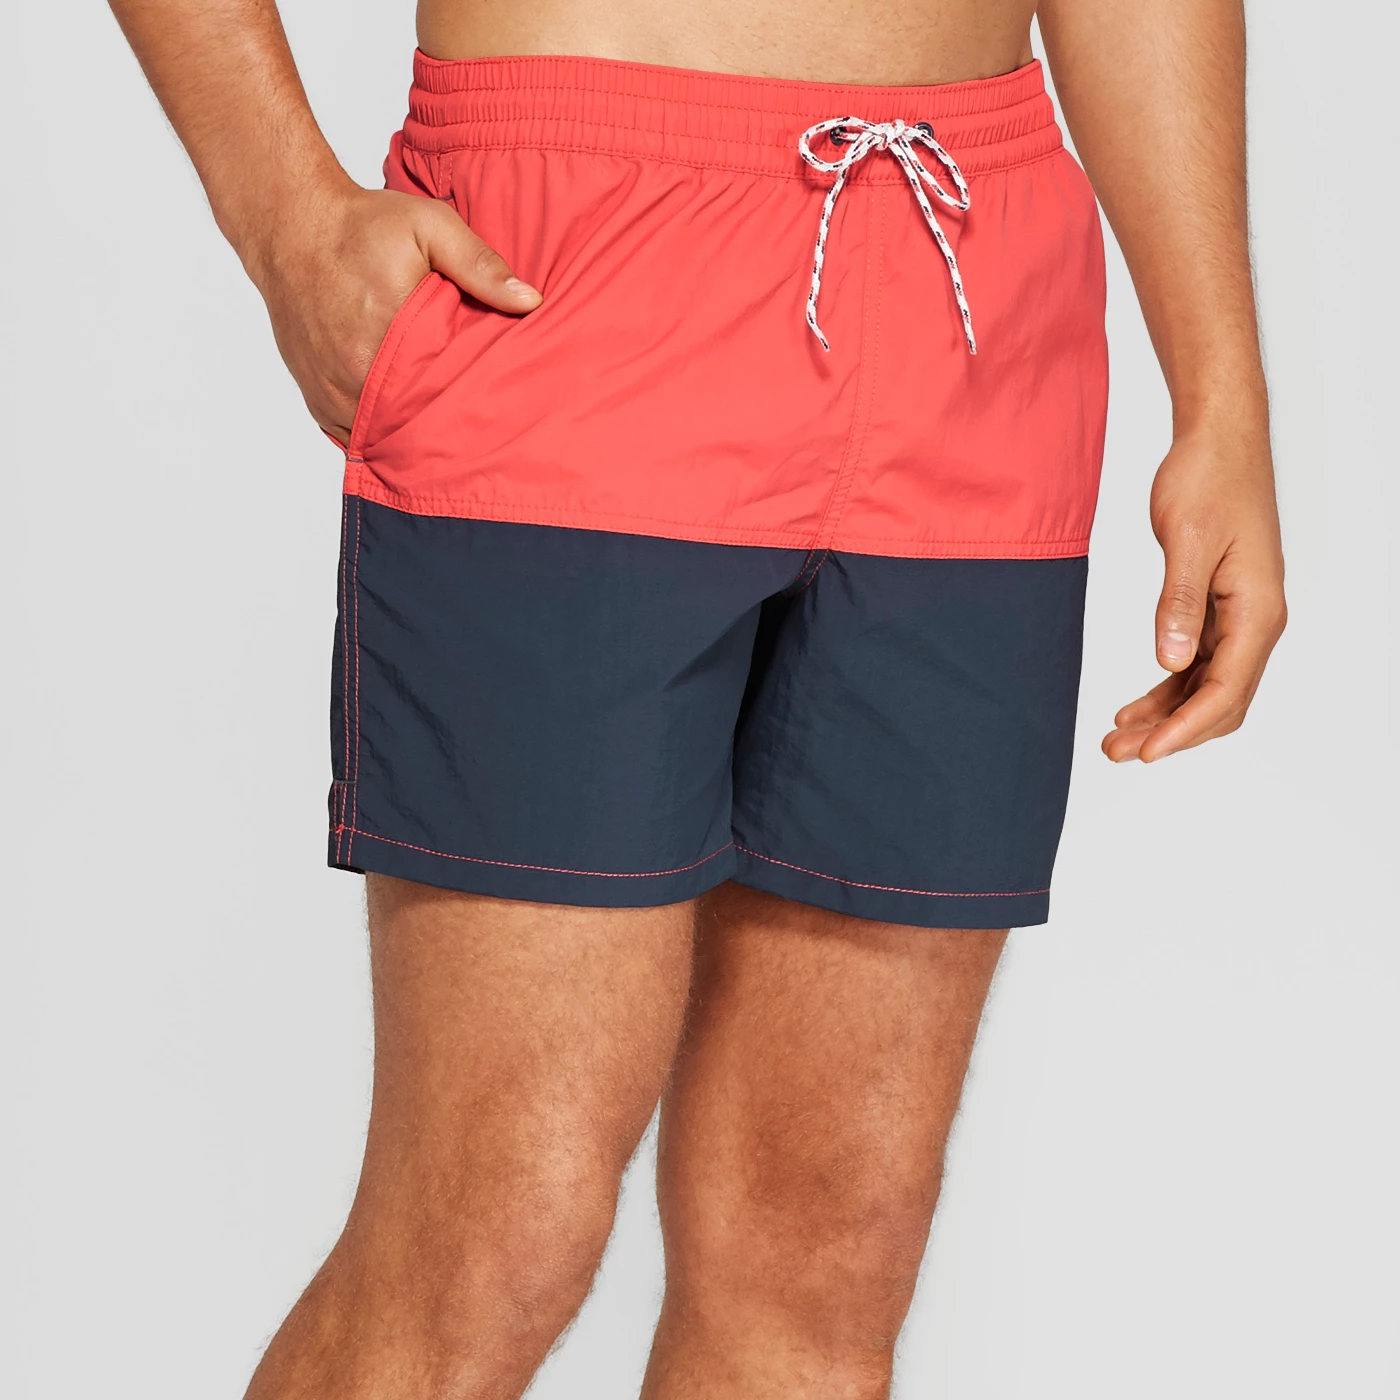 Men's 6" Double Panel Colorblock Swim Trunks - Goodfellow & Co™ Coral - image 1 of 3